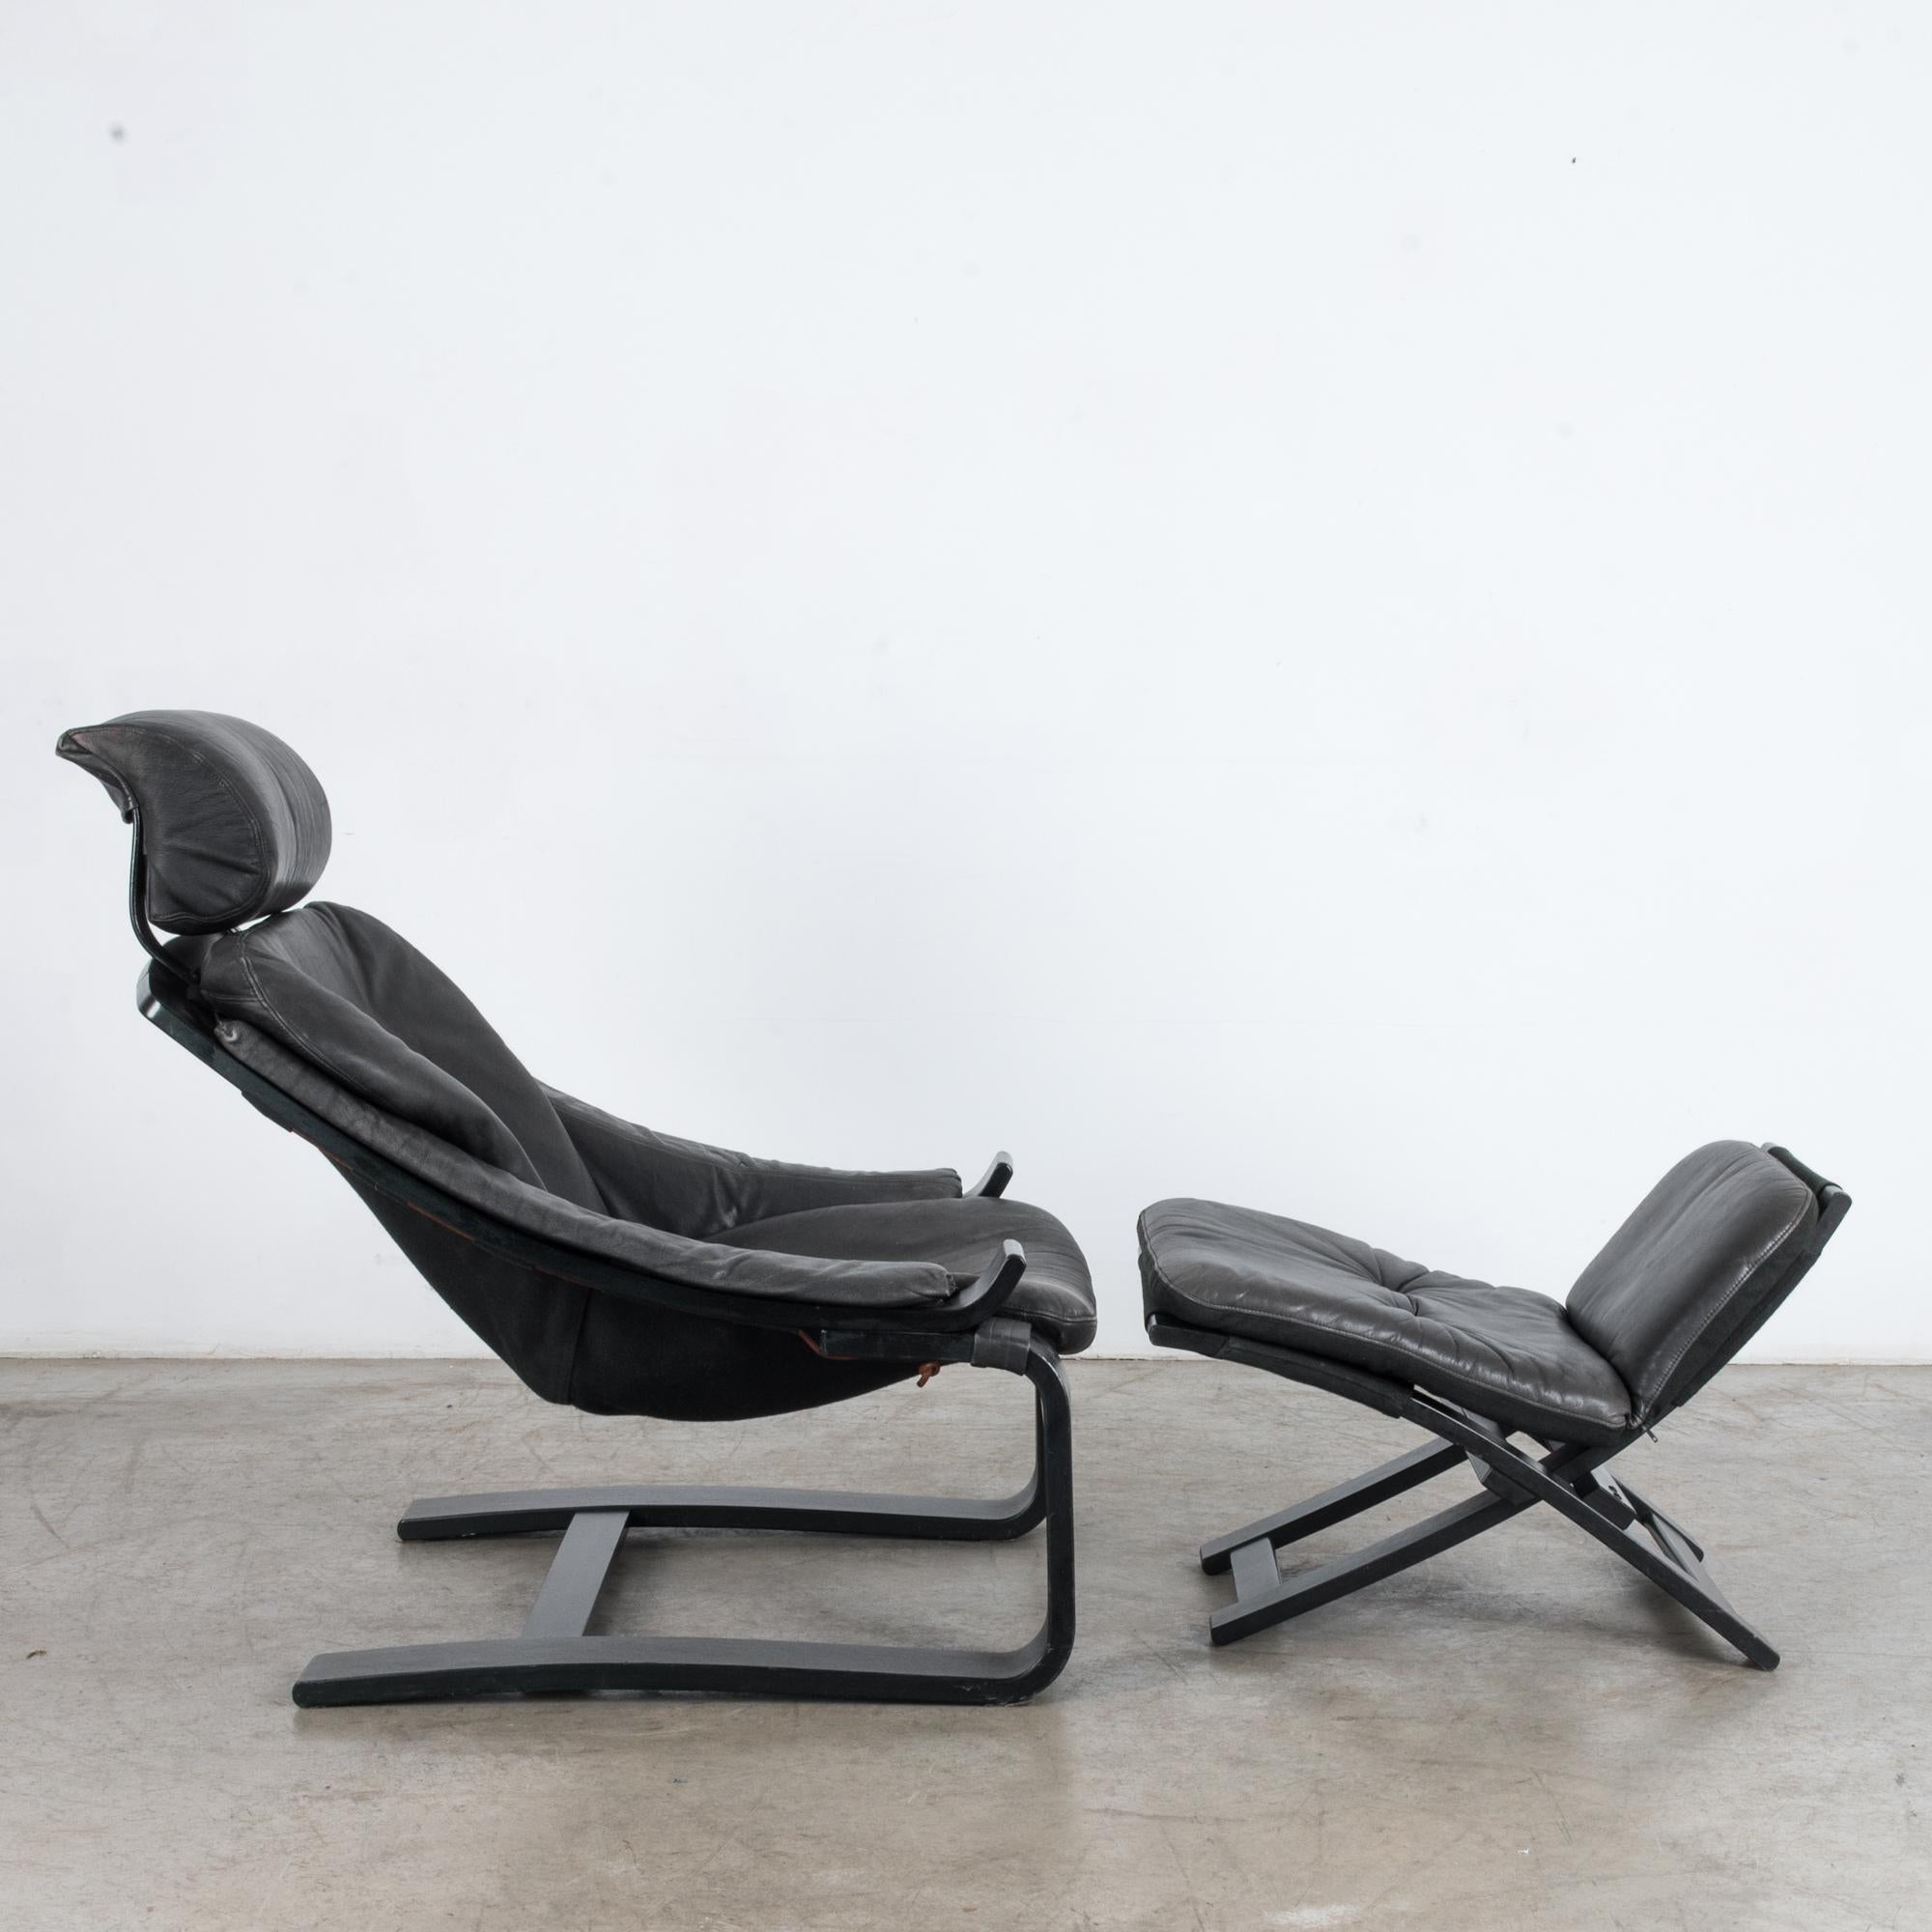 Late 20th Century 1970s Swedish Kroken Black Leather Armchair and Ottoman by Ake Fribytter